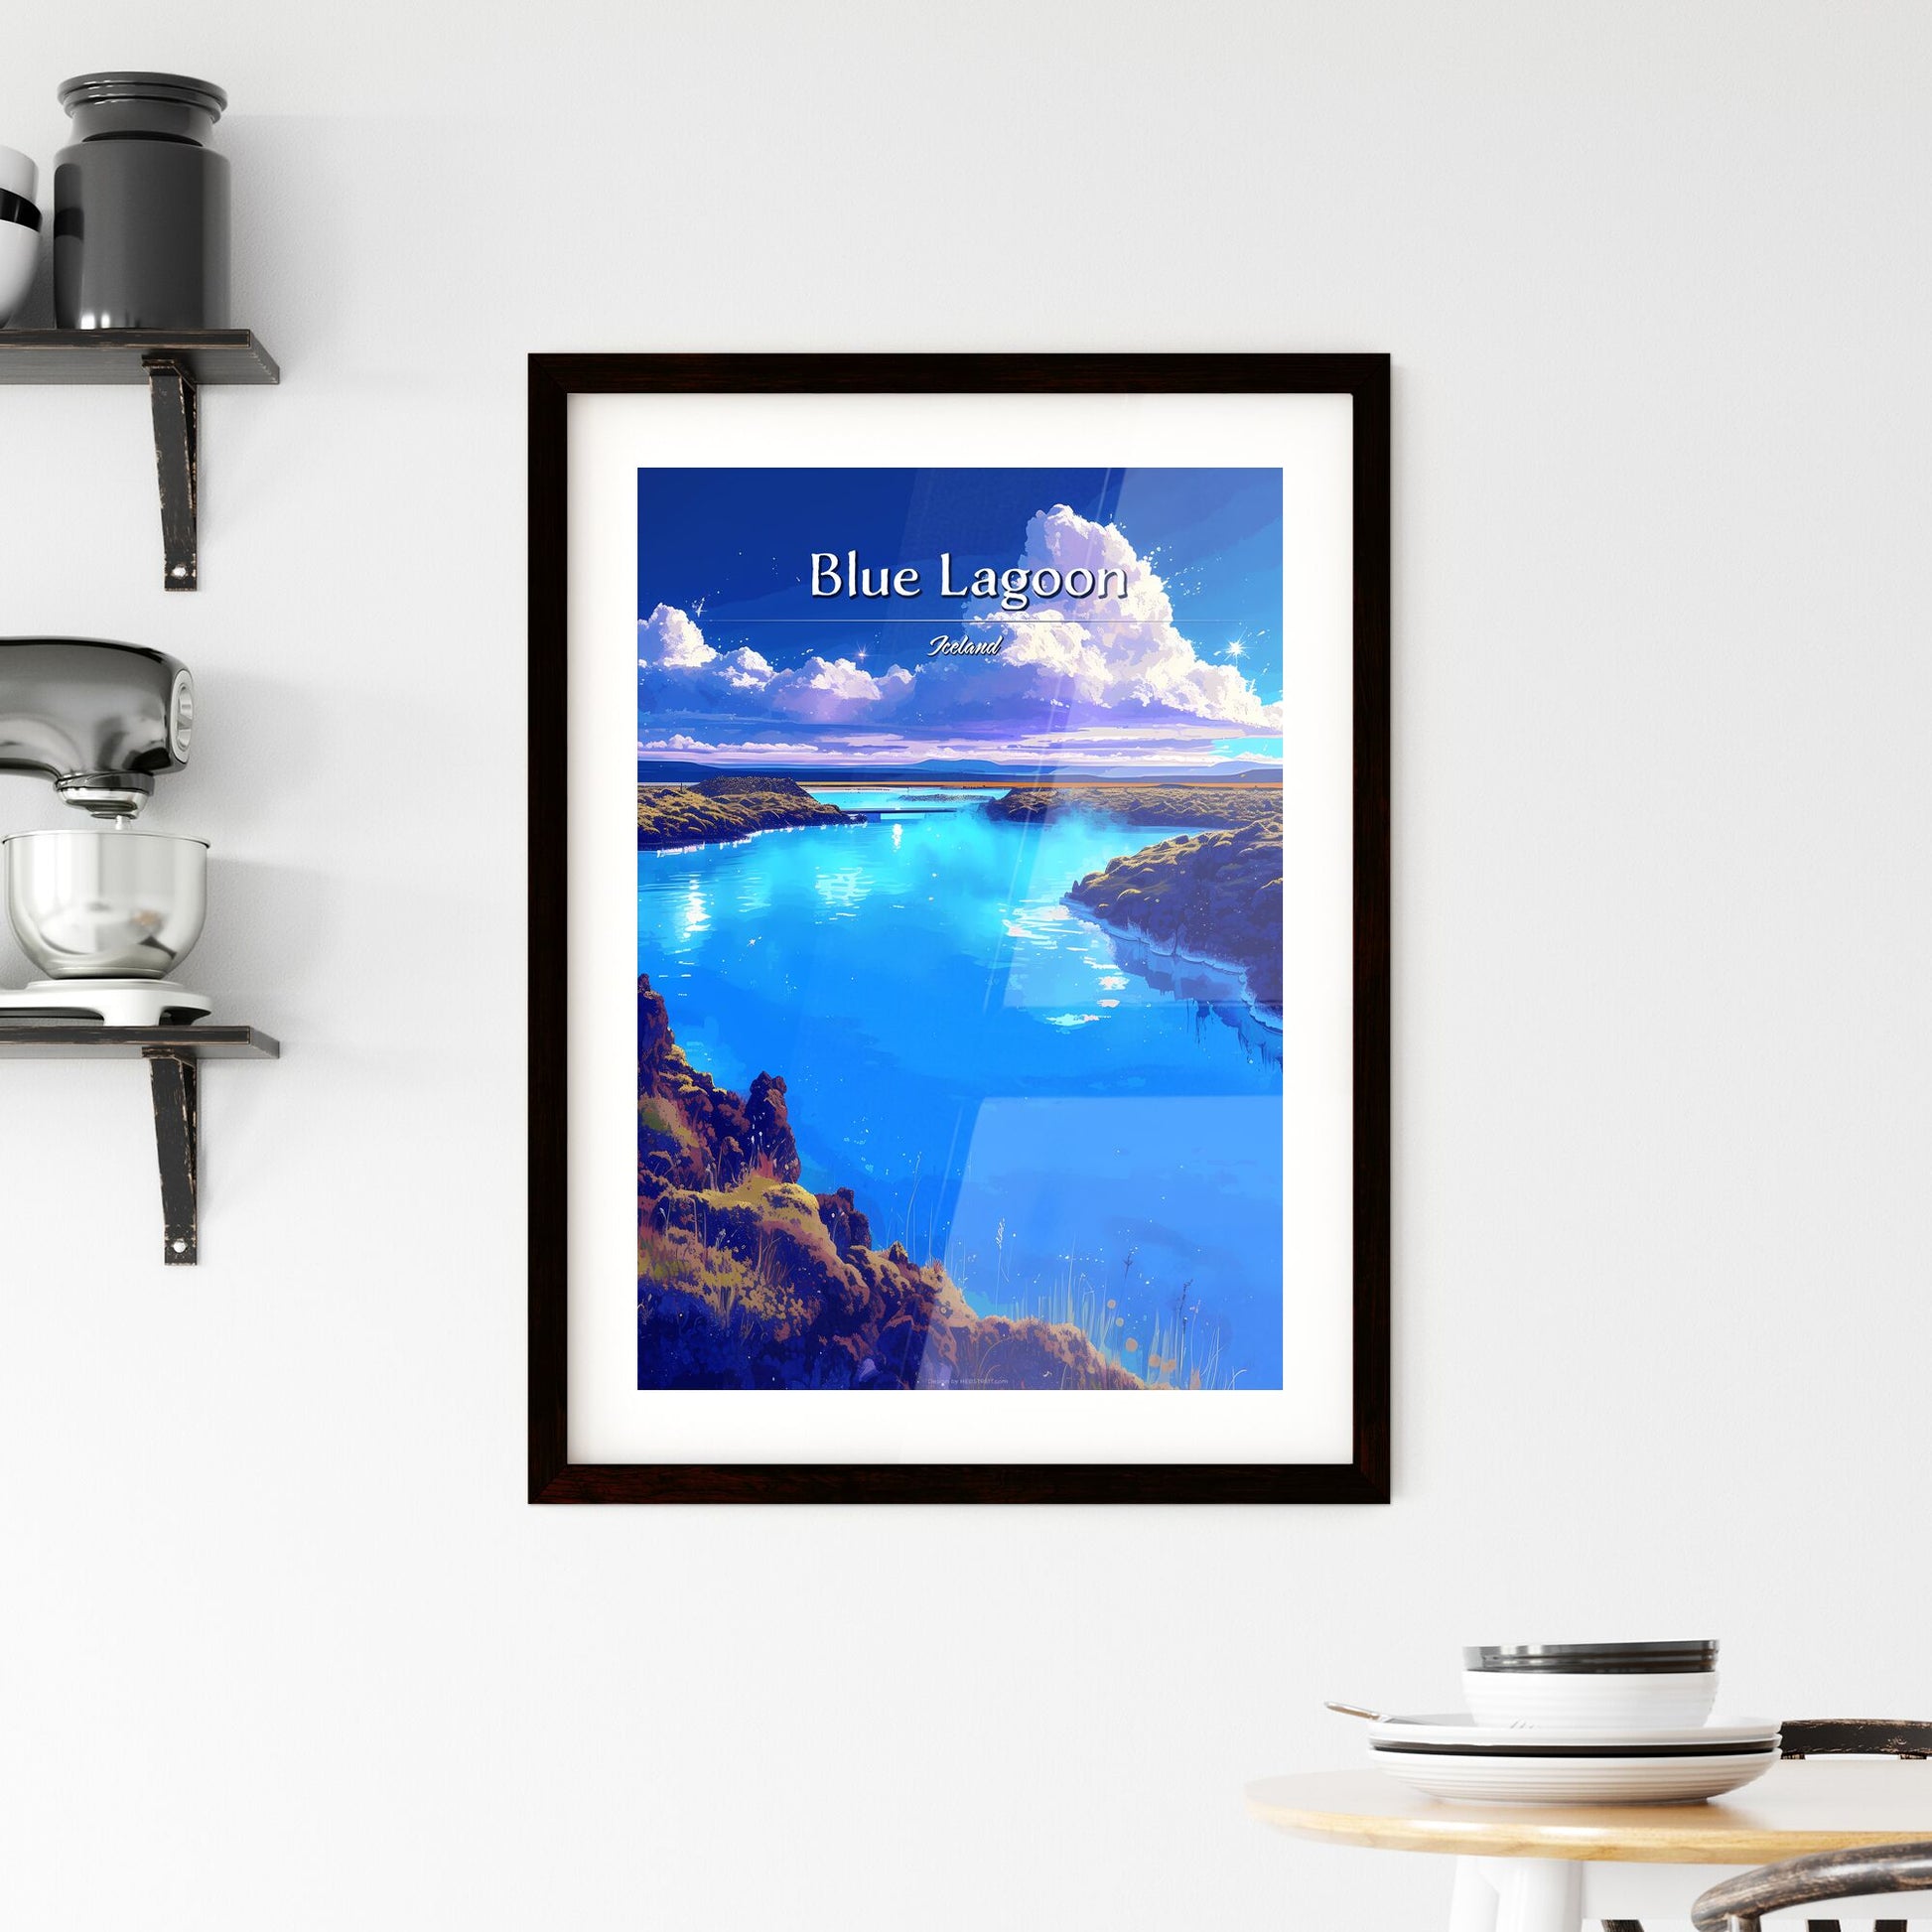 Blue Lagoon, Iceland - Art print of a blue water with rocks and clouds Default Title